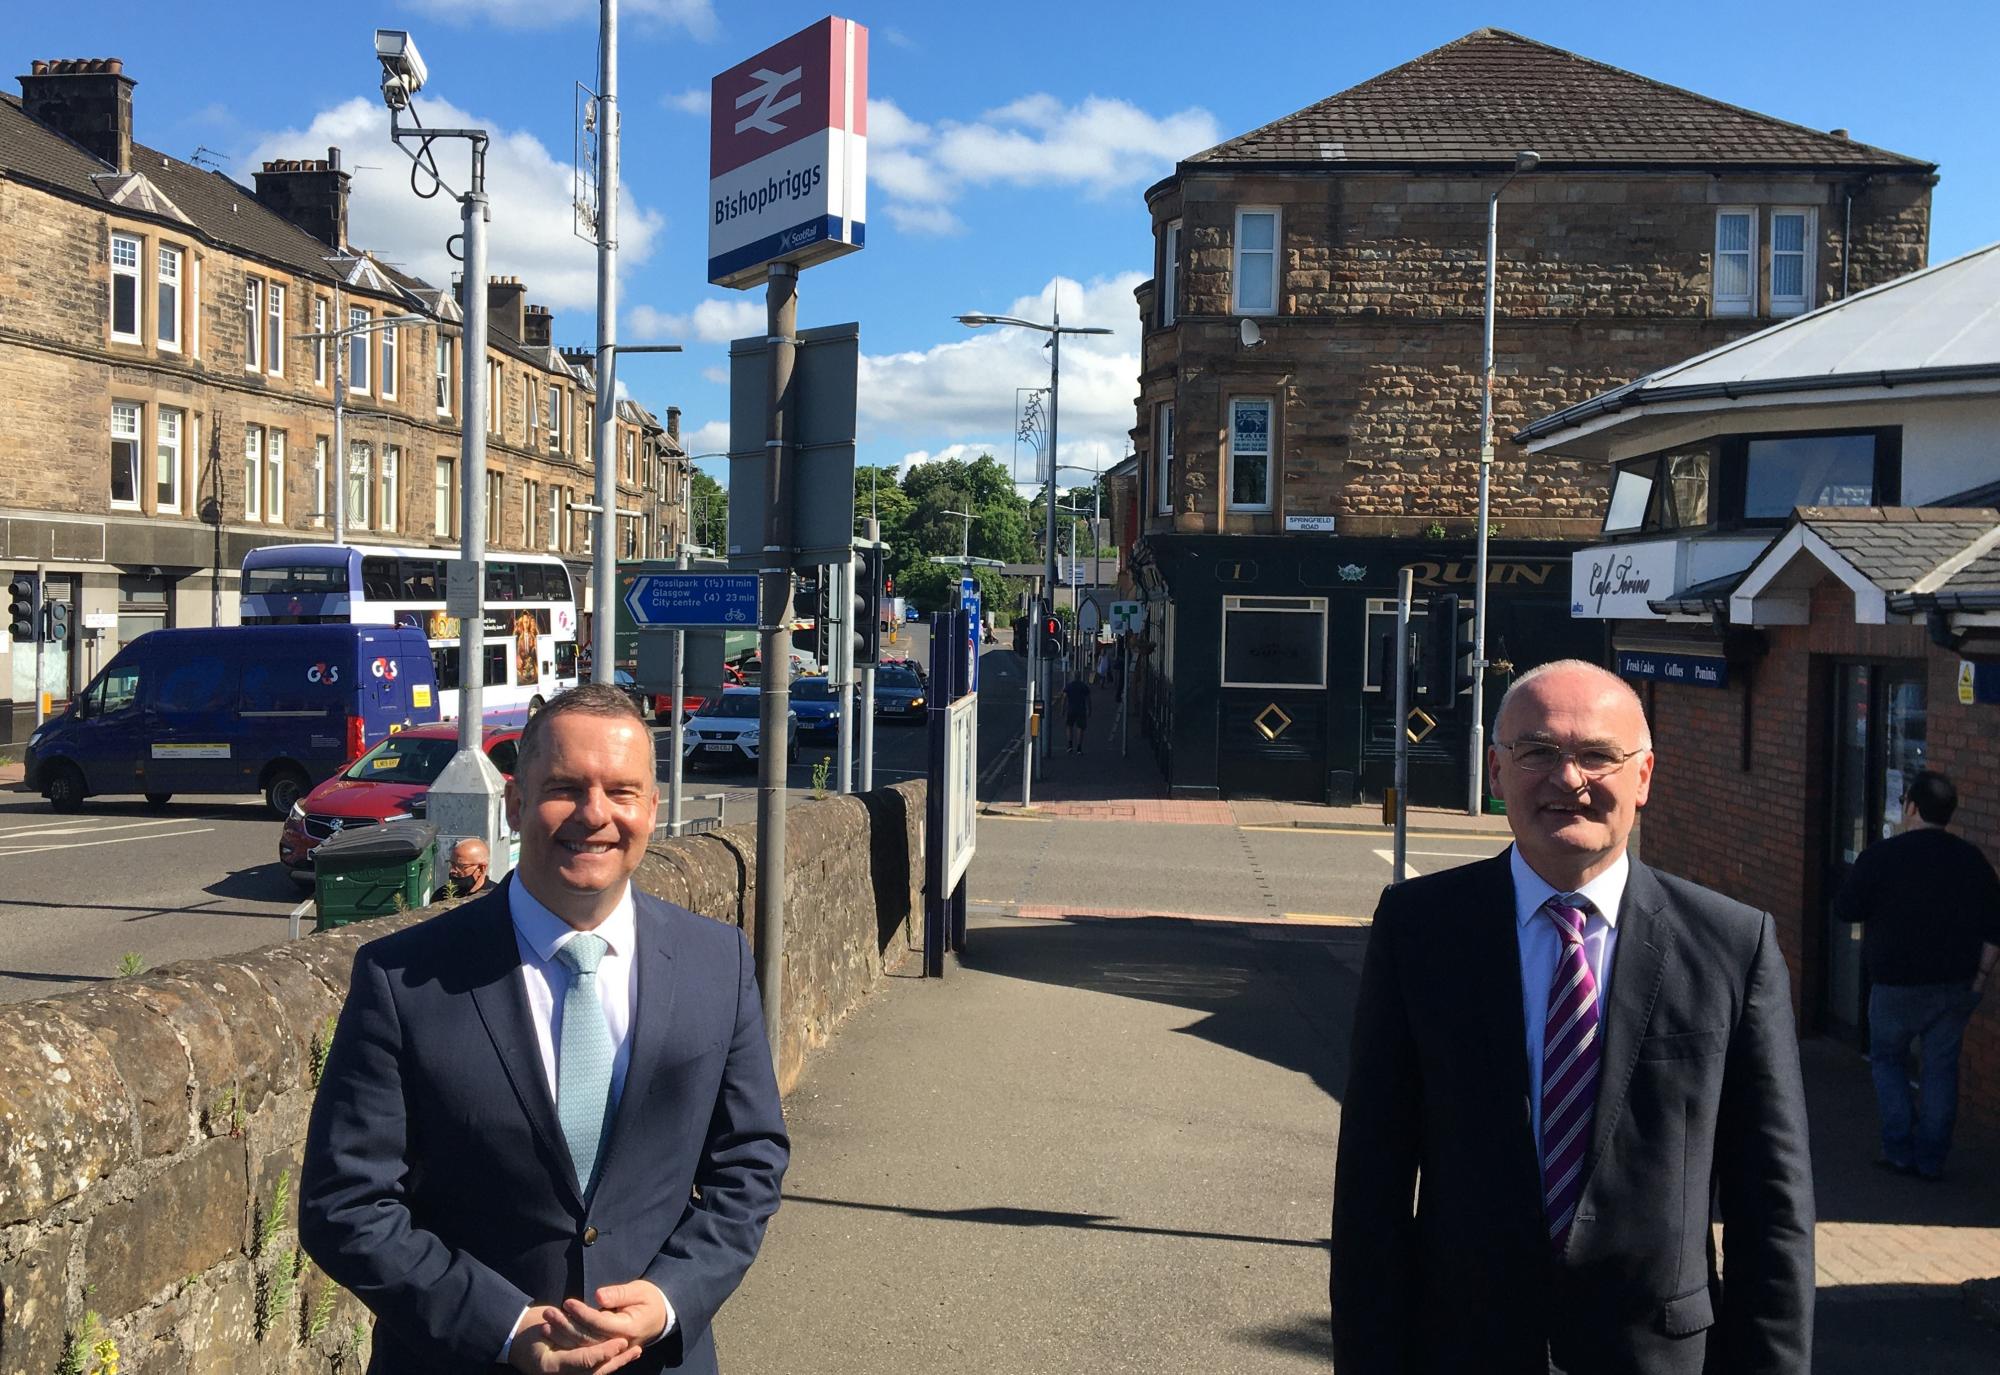 Joint Leaders at Bishopbriggs Station